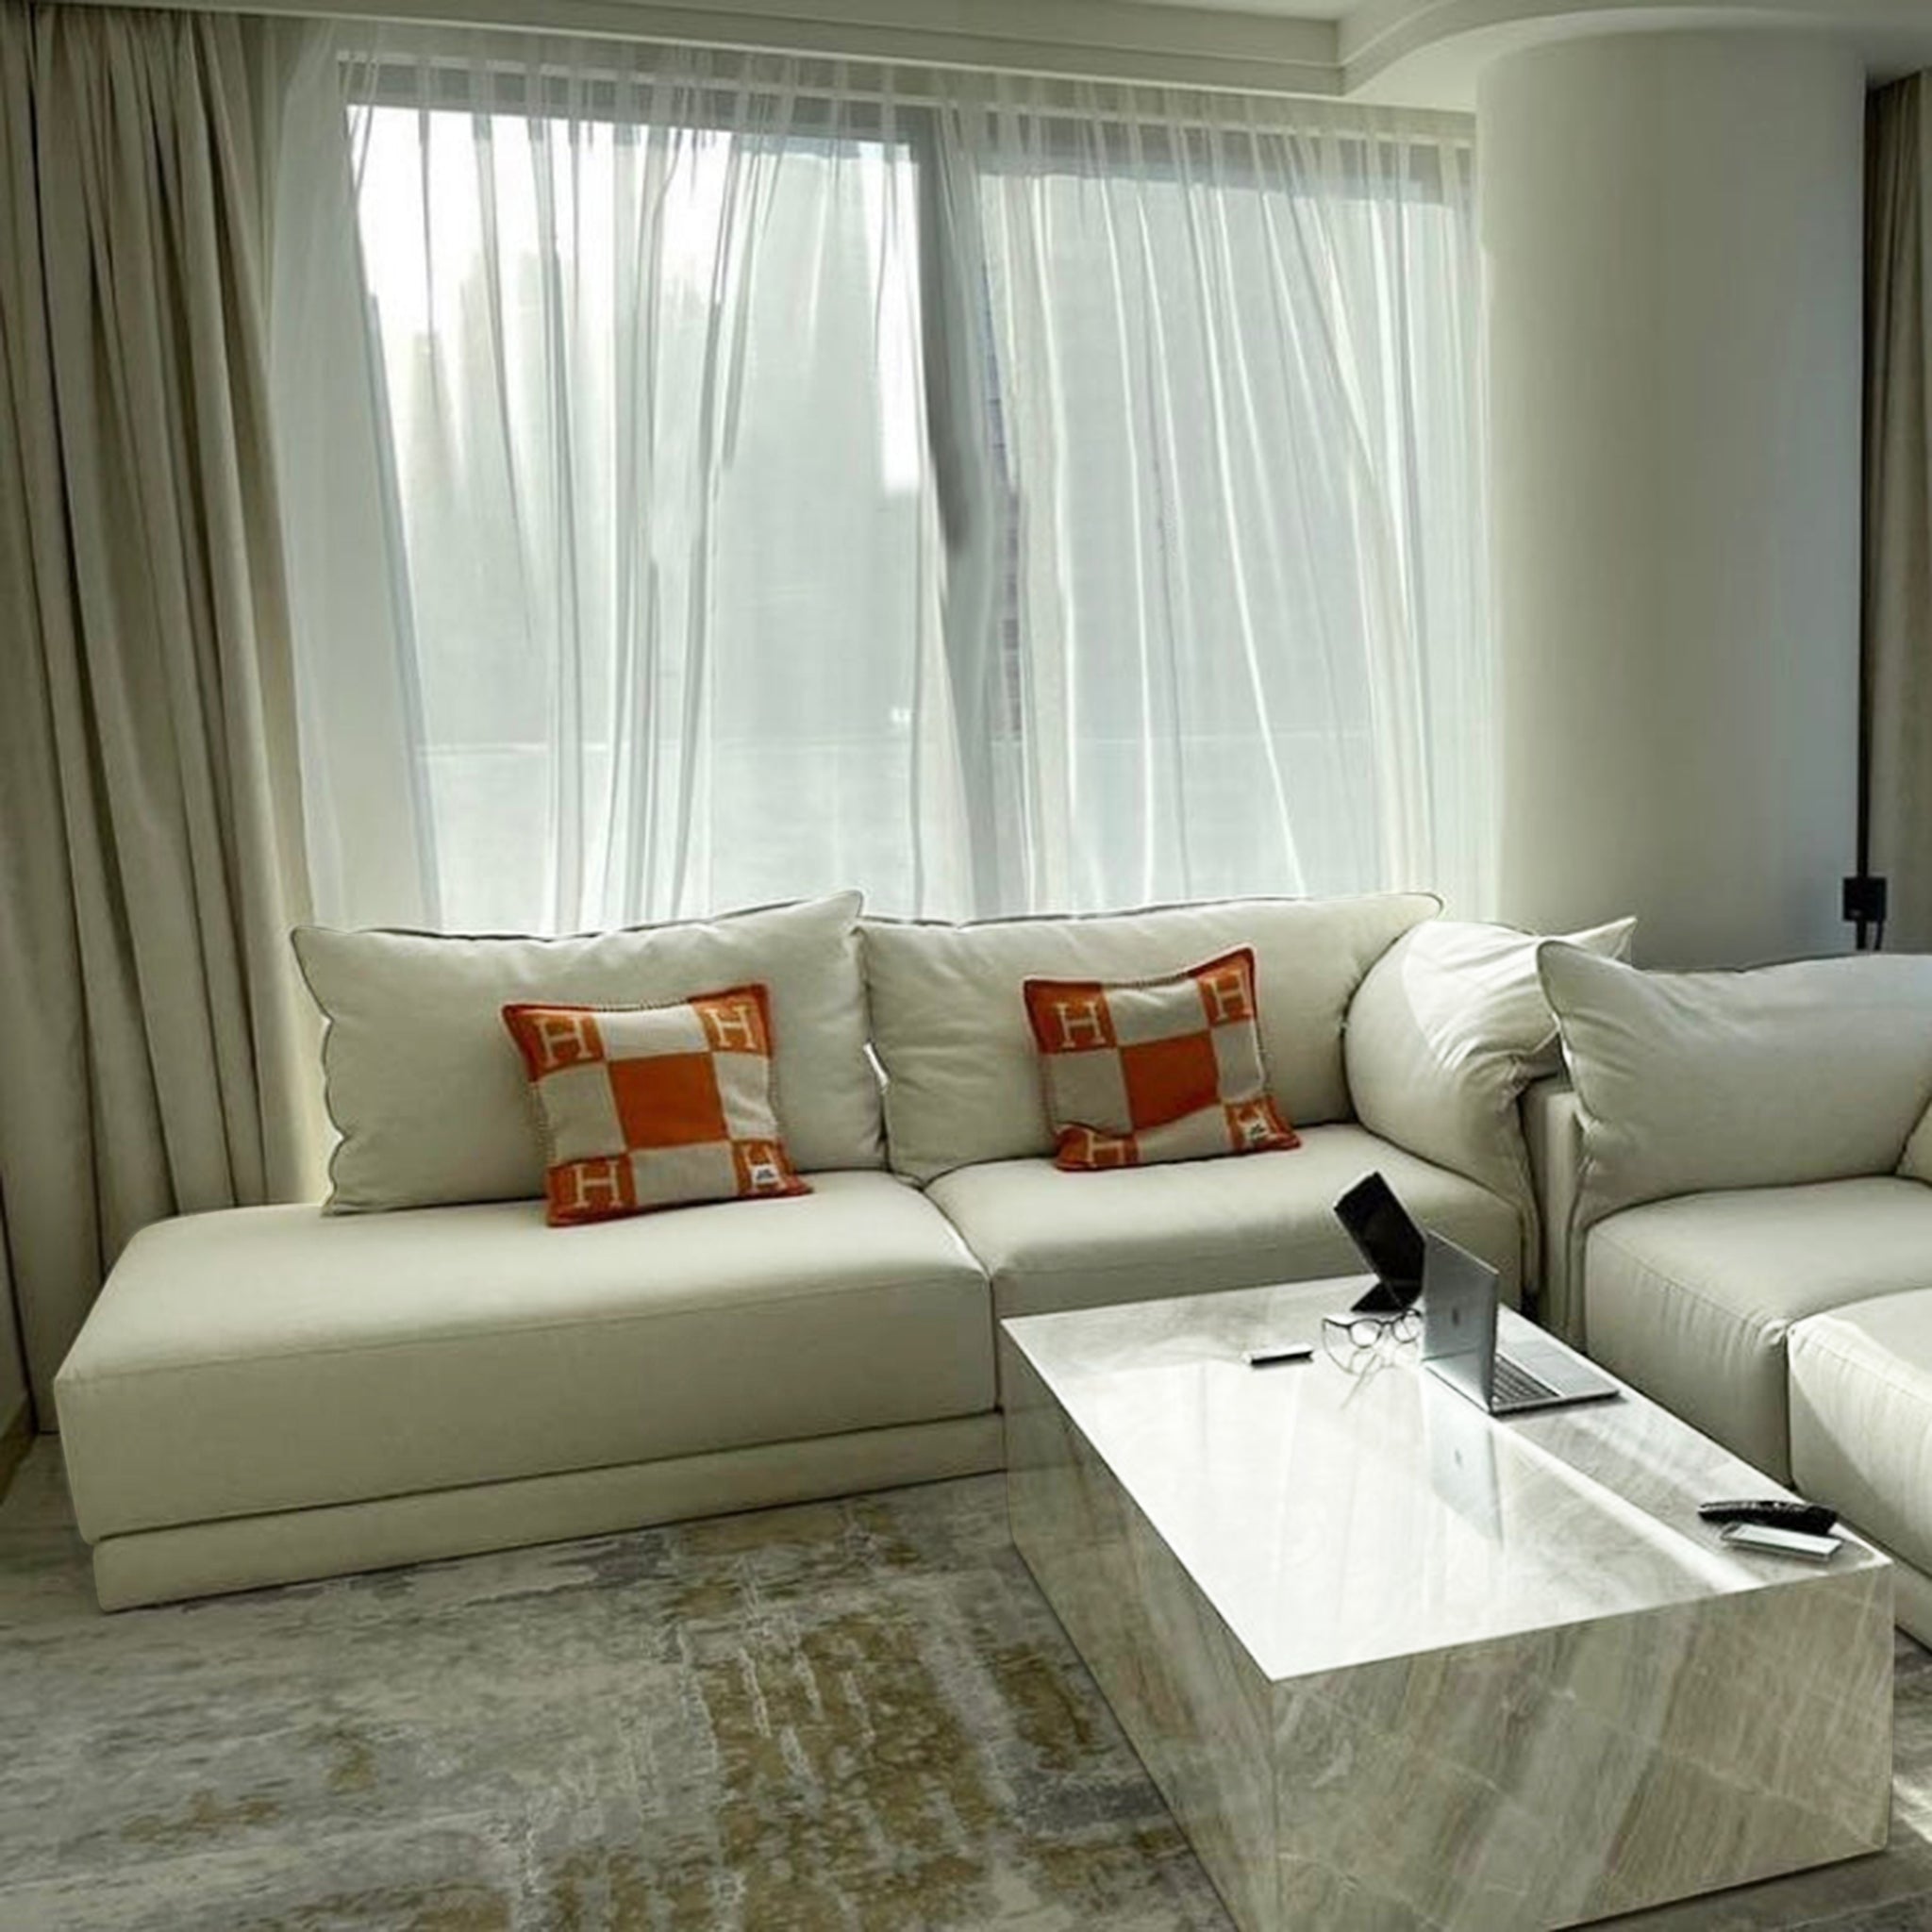 Elegant living room setup featuring a modern beige sectional sofa with plush cushions and orange accent pillows, complemented by a sleek marble coffee table and natural light streaming through sheer curtains.